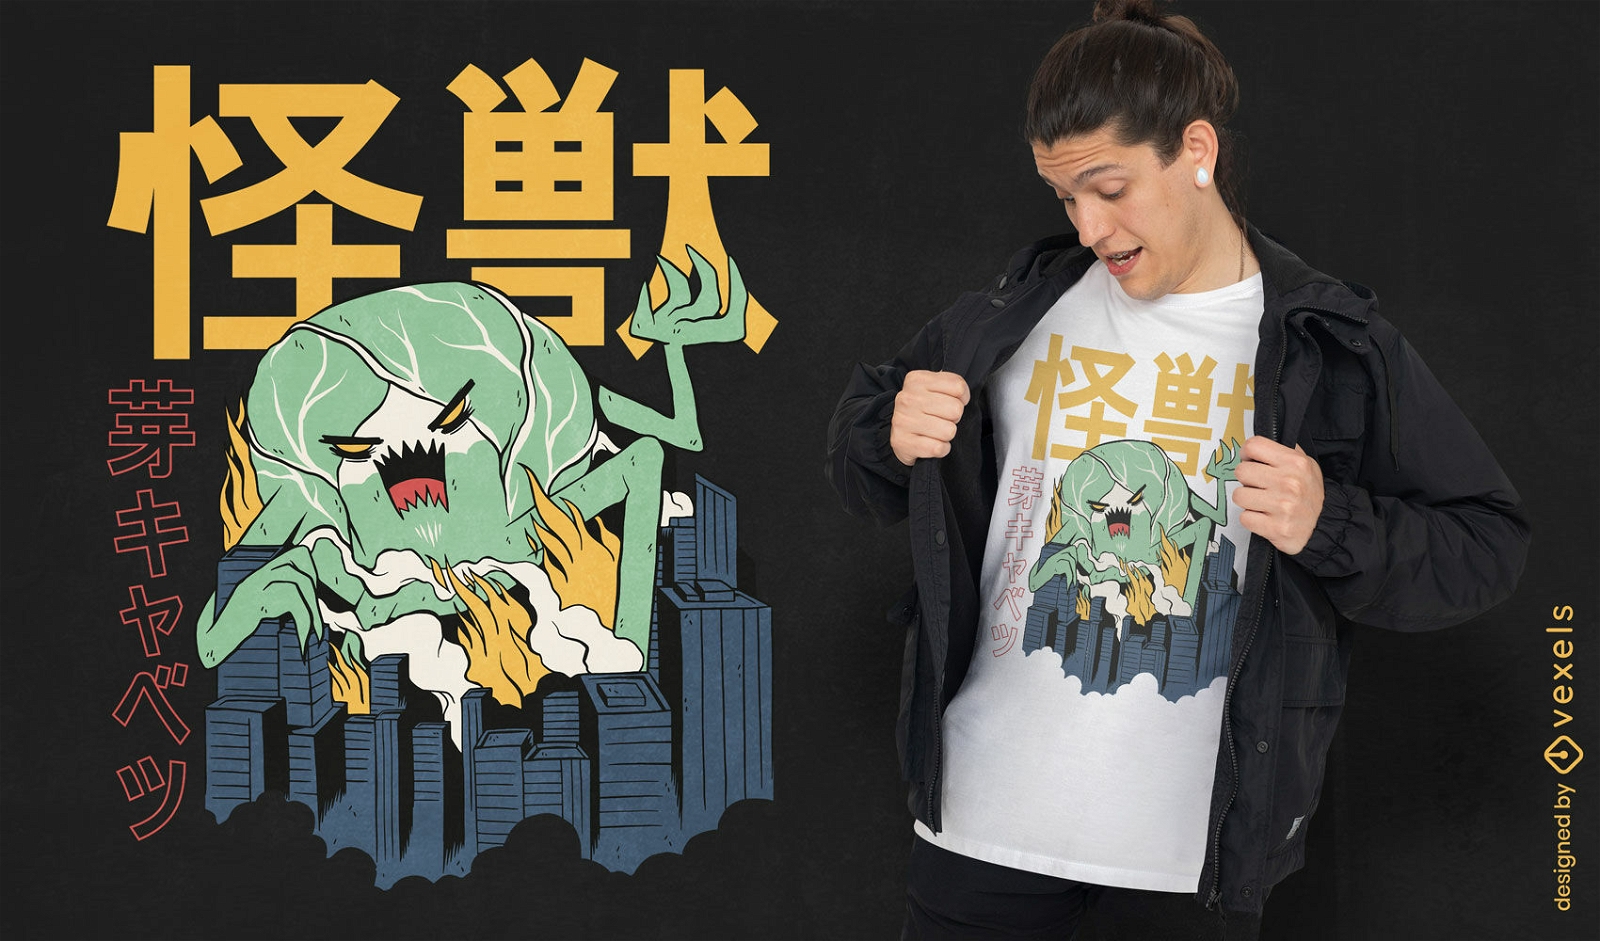 Giant Brussel sprouts monster t-shirt design